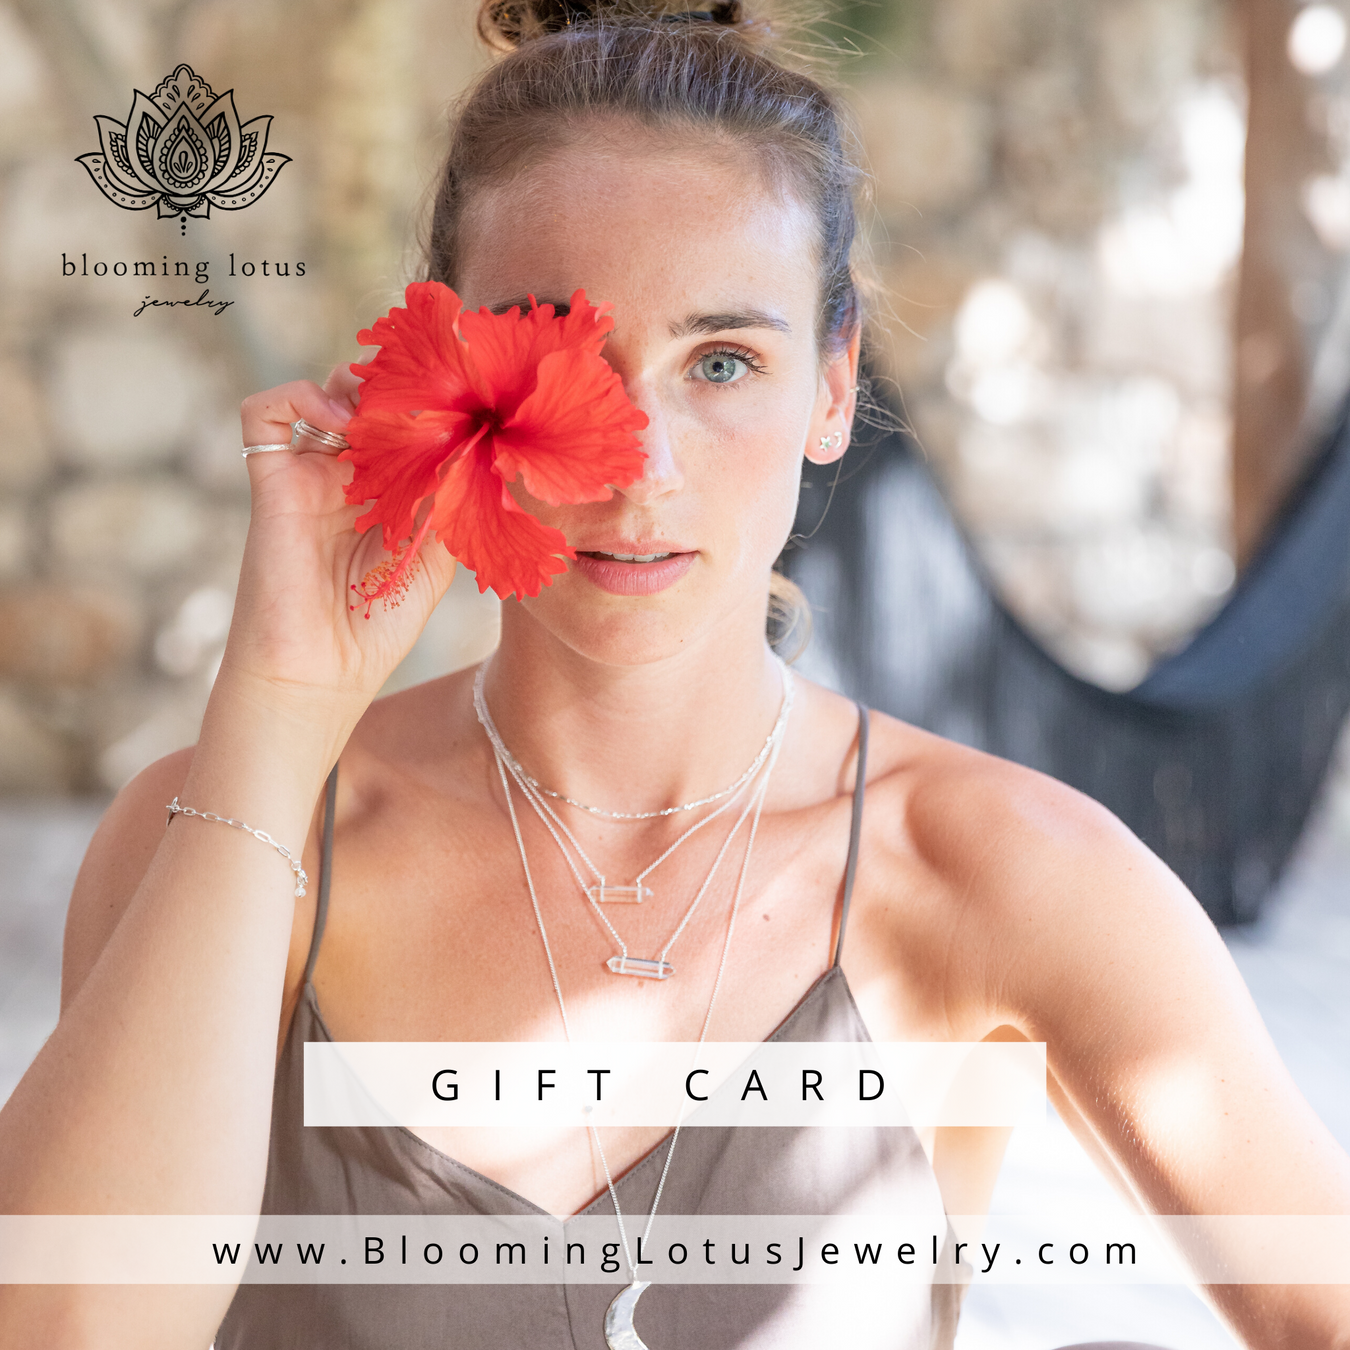 Gift Card - model holding flower with layereing necklaces - Yoga Jewelry - Gifts for Her - Meaningful Jewelry - Blooming Lotus Jewelry